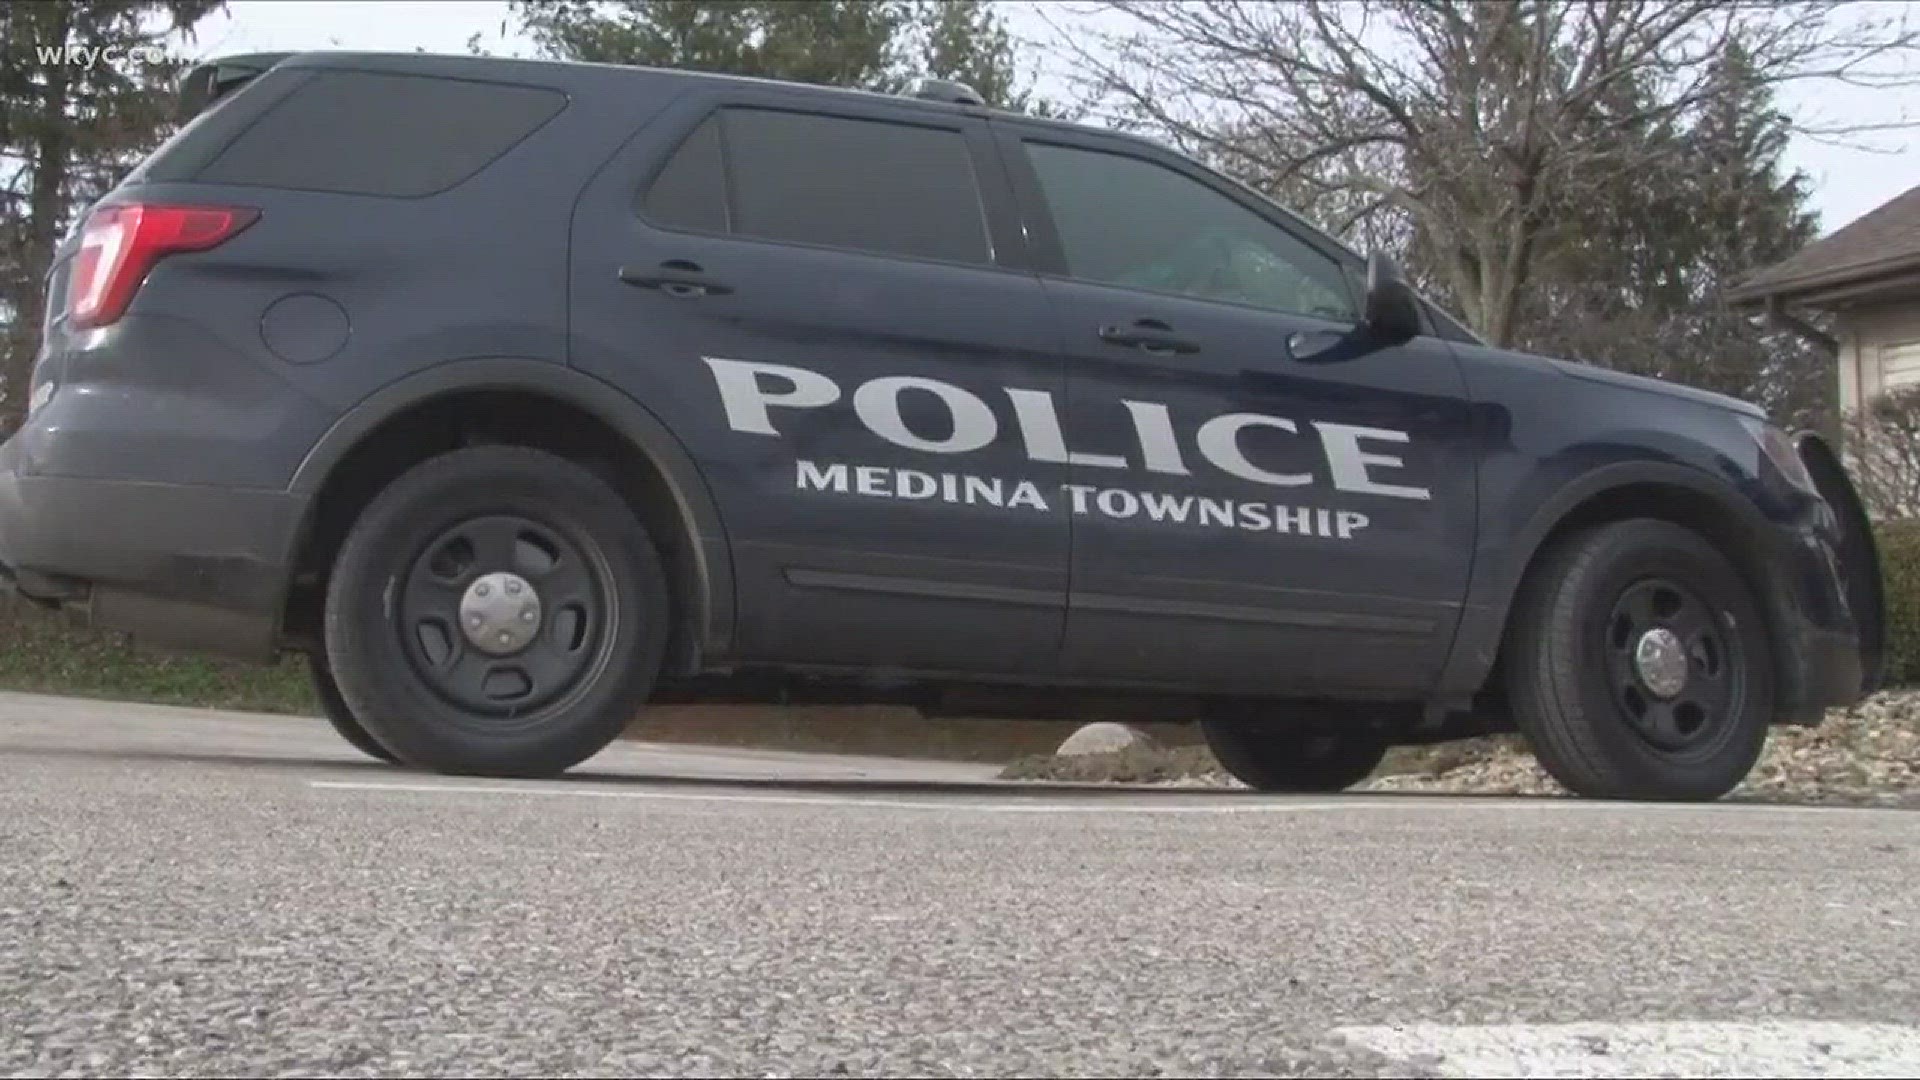 Medina Township police collect thousands of items in theft ring